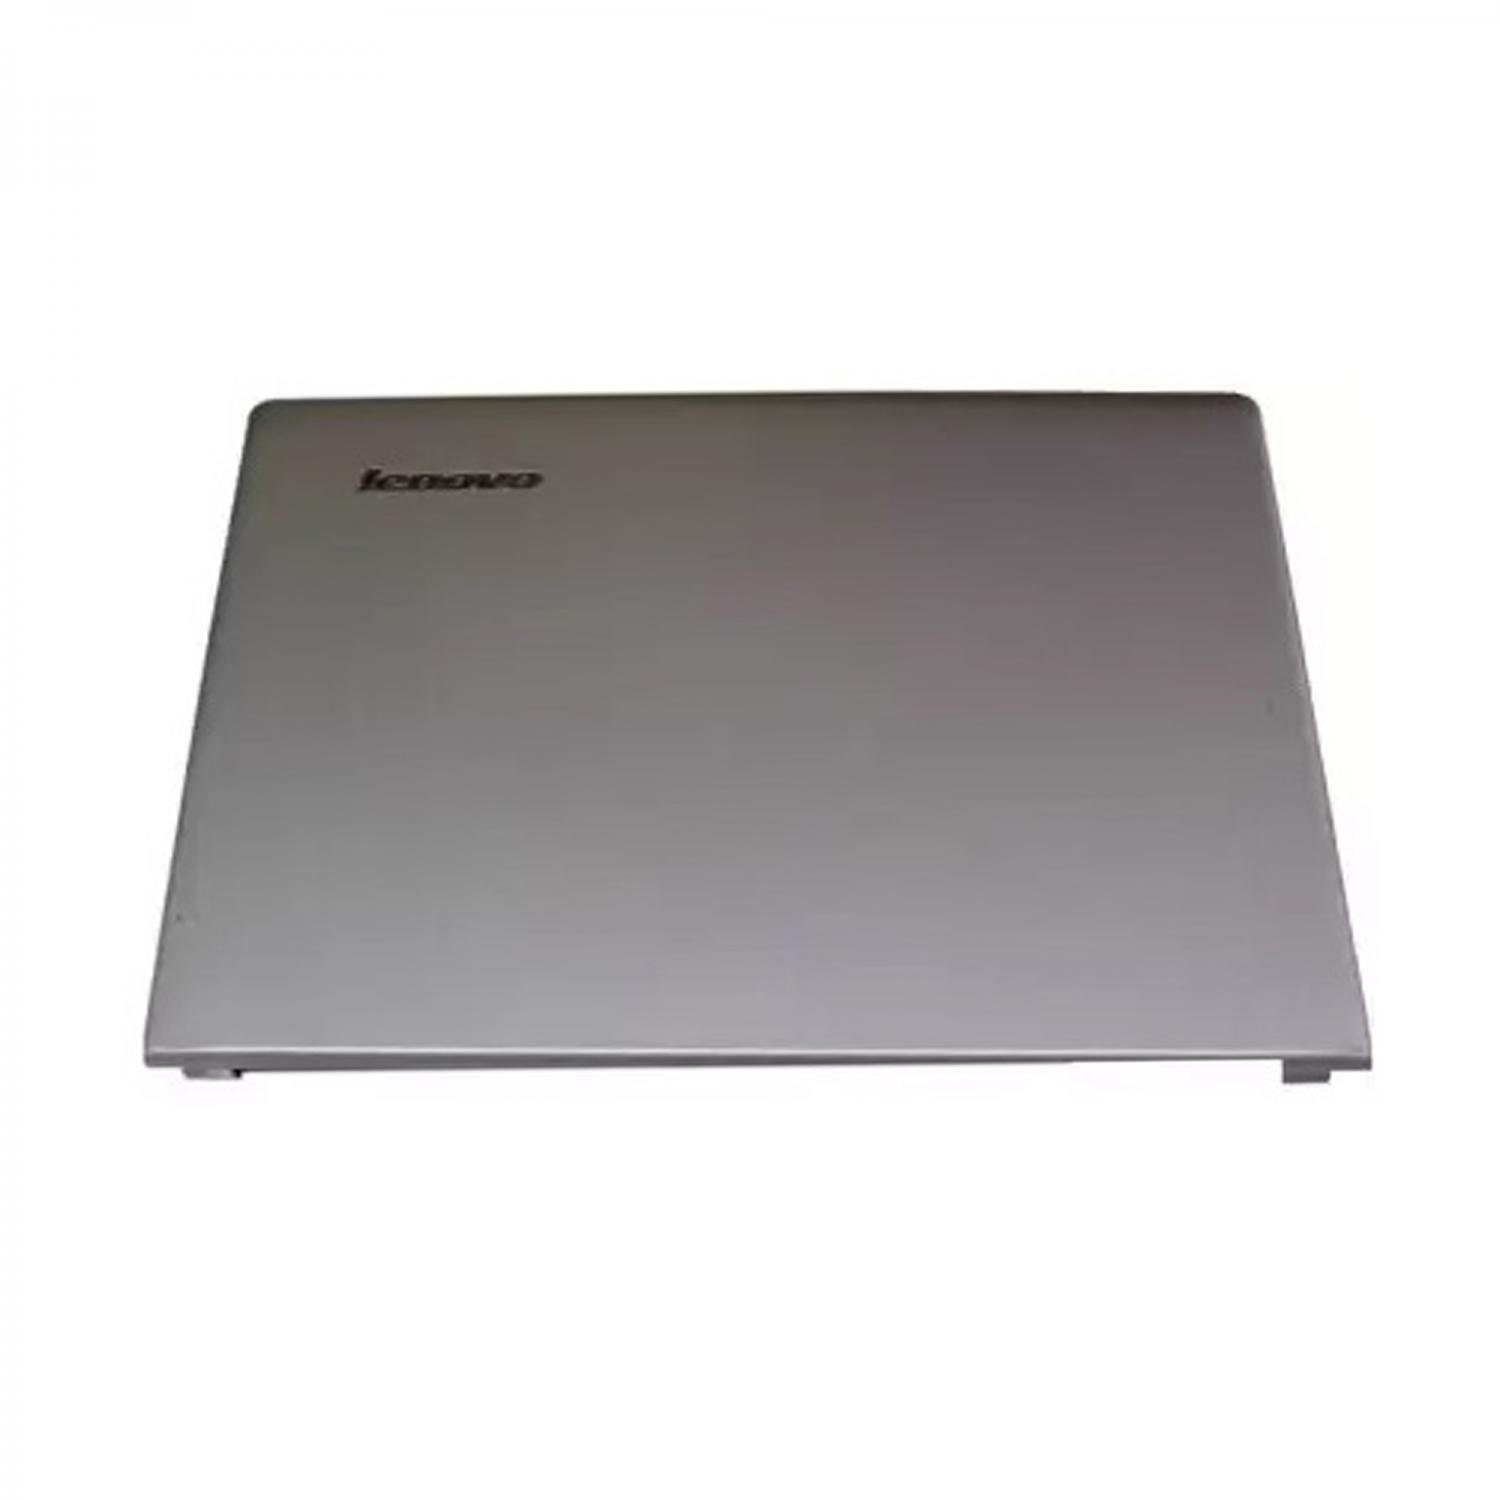 Lenovo Ideapad S400 OEM LCD Back Cover Top Lid With Front Trim Bezel P/N AP0SB000C00